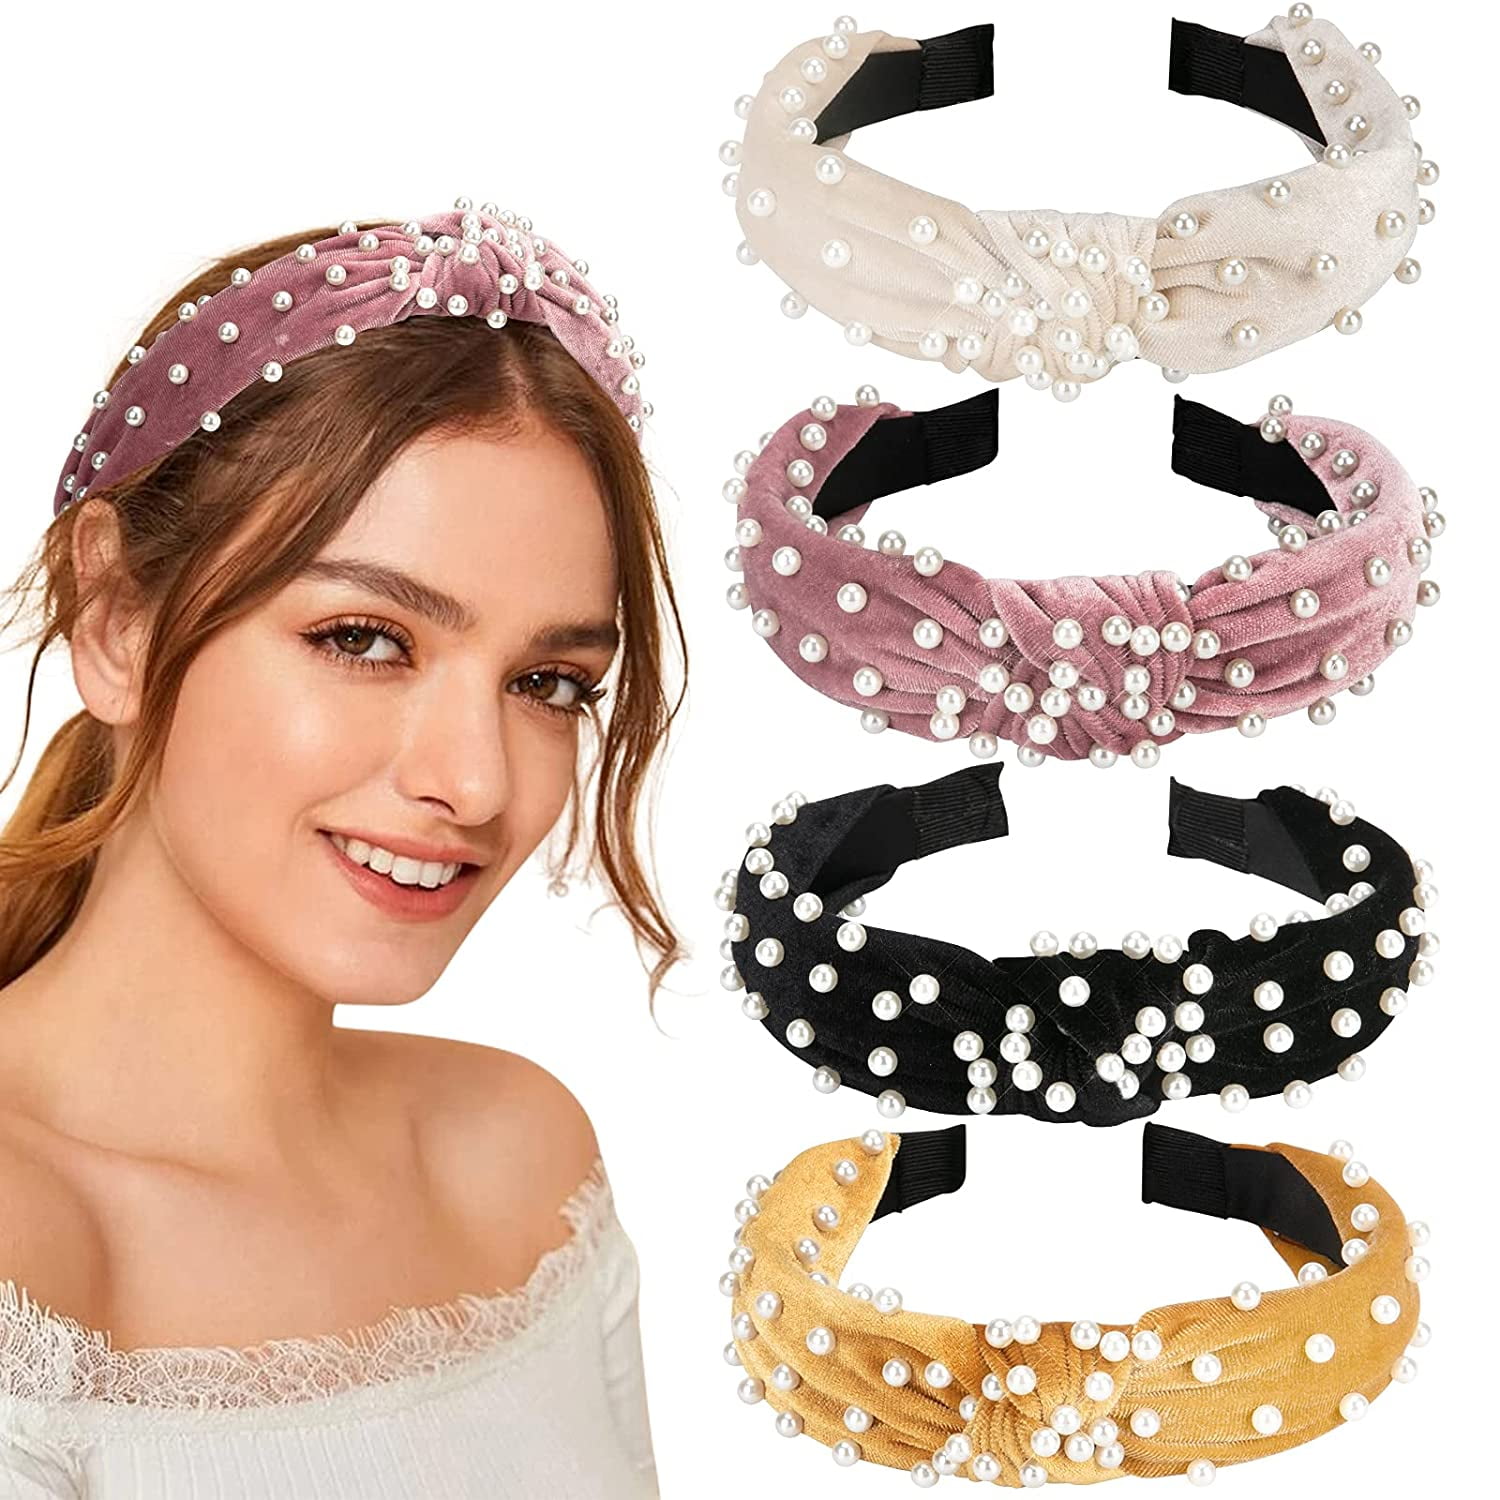 Fashion Women Turban Pearl Headband Knotted Hairband Hoop Hair Accessories Party